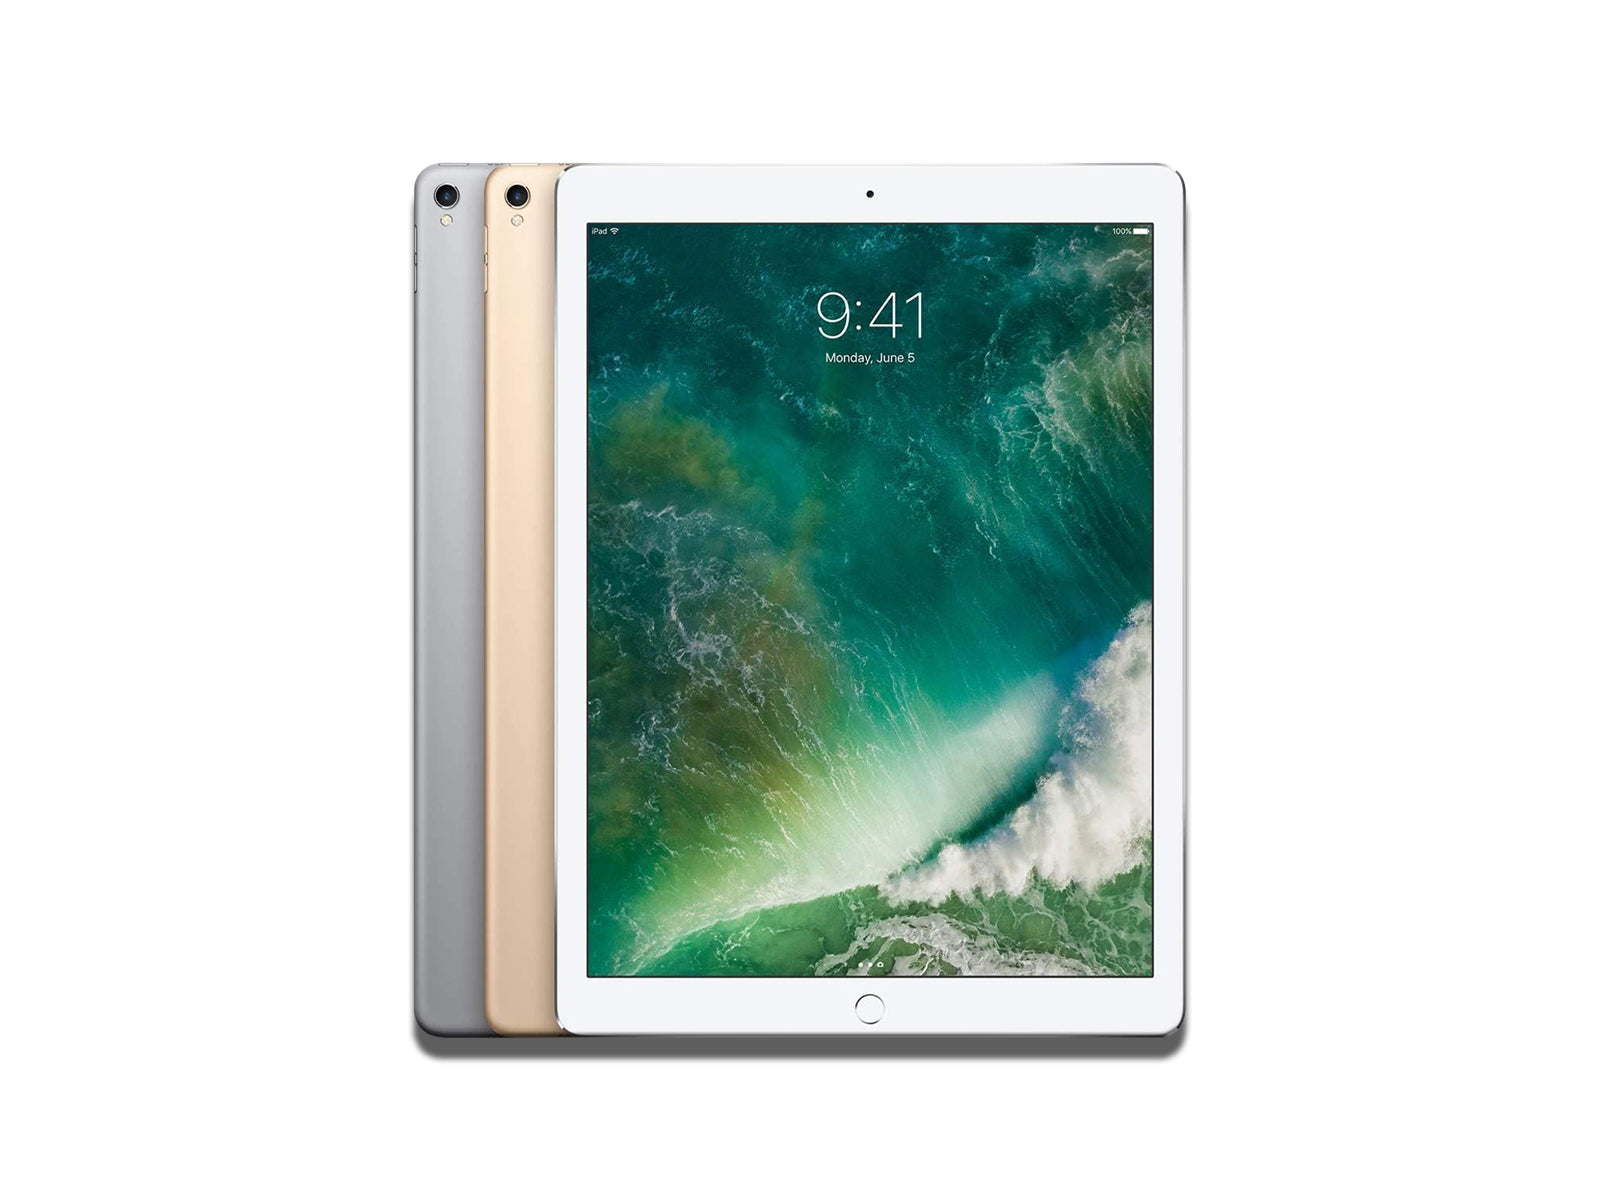 Apple iPad Pro 12.9-inch 2nd Generation in all colours of the